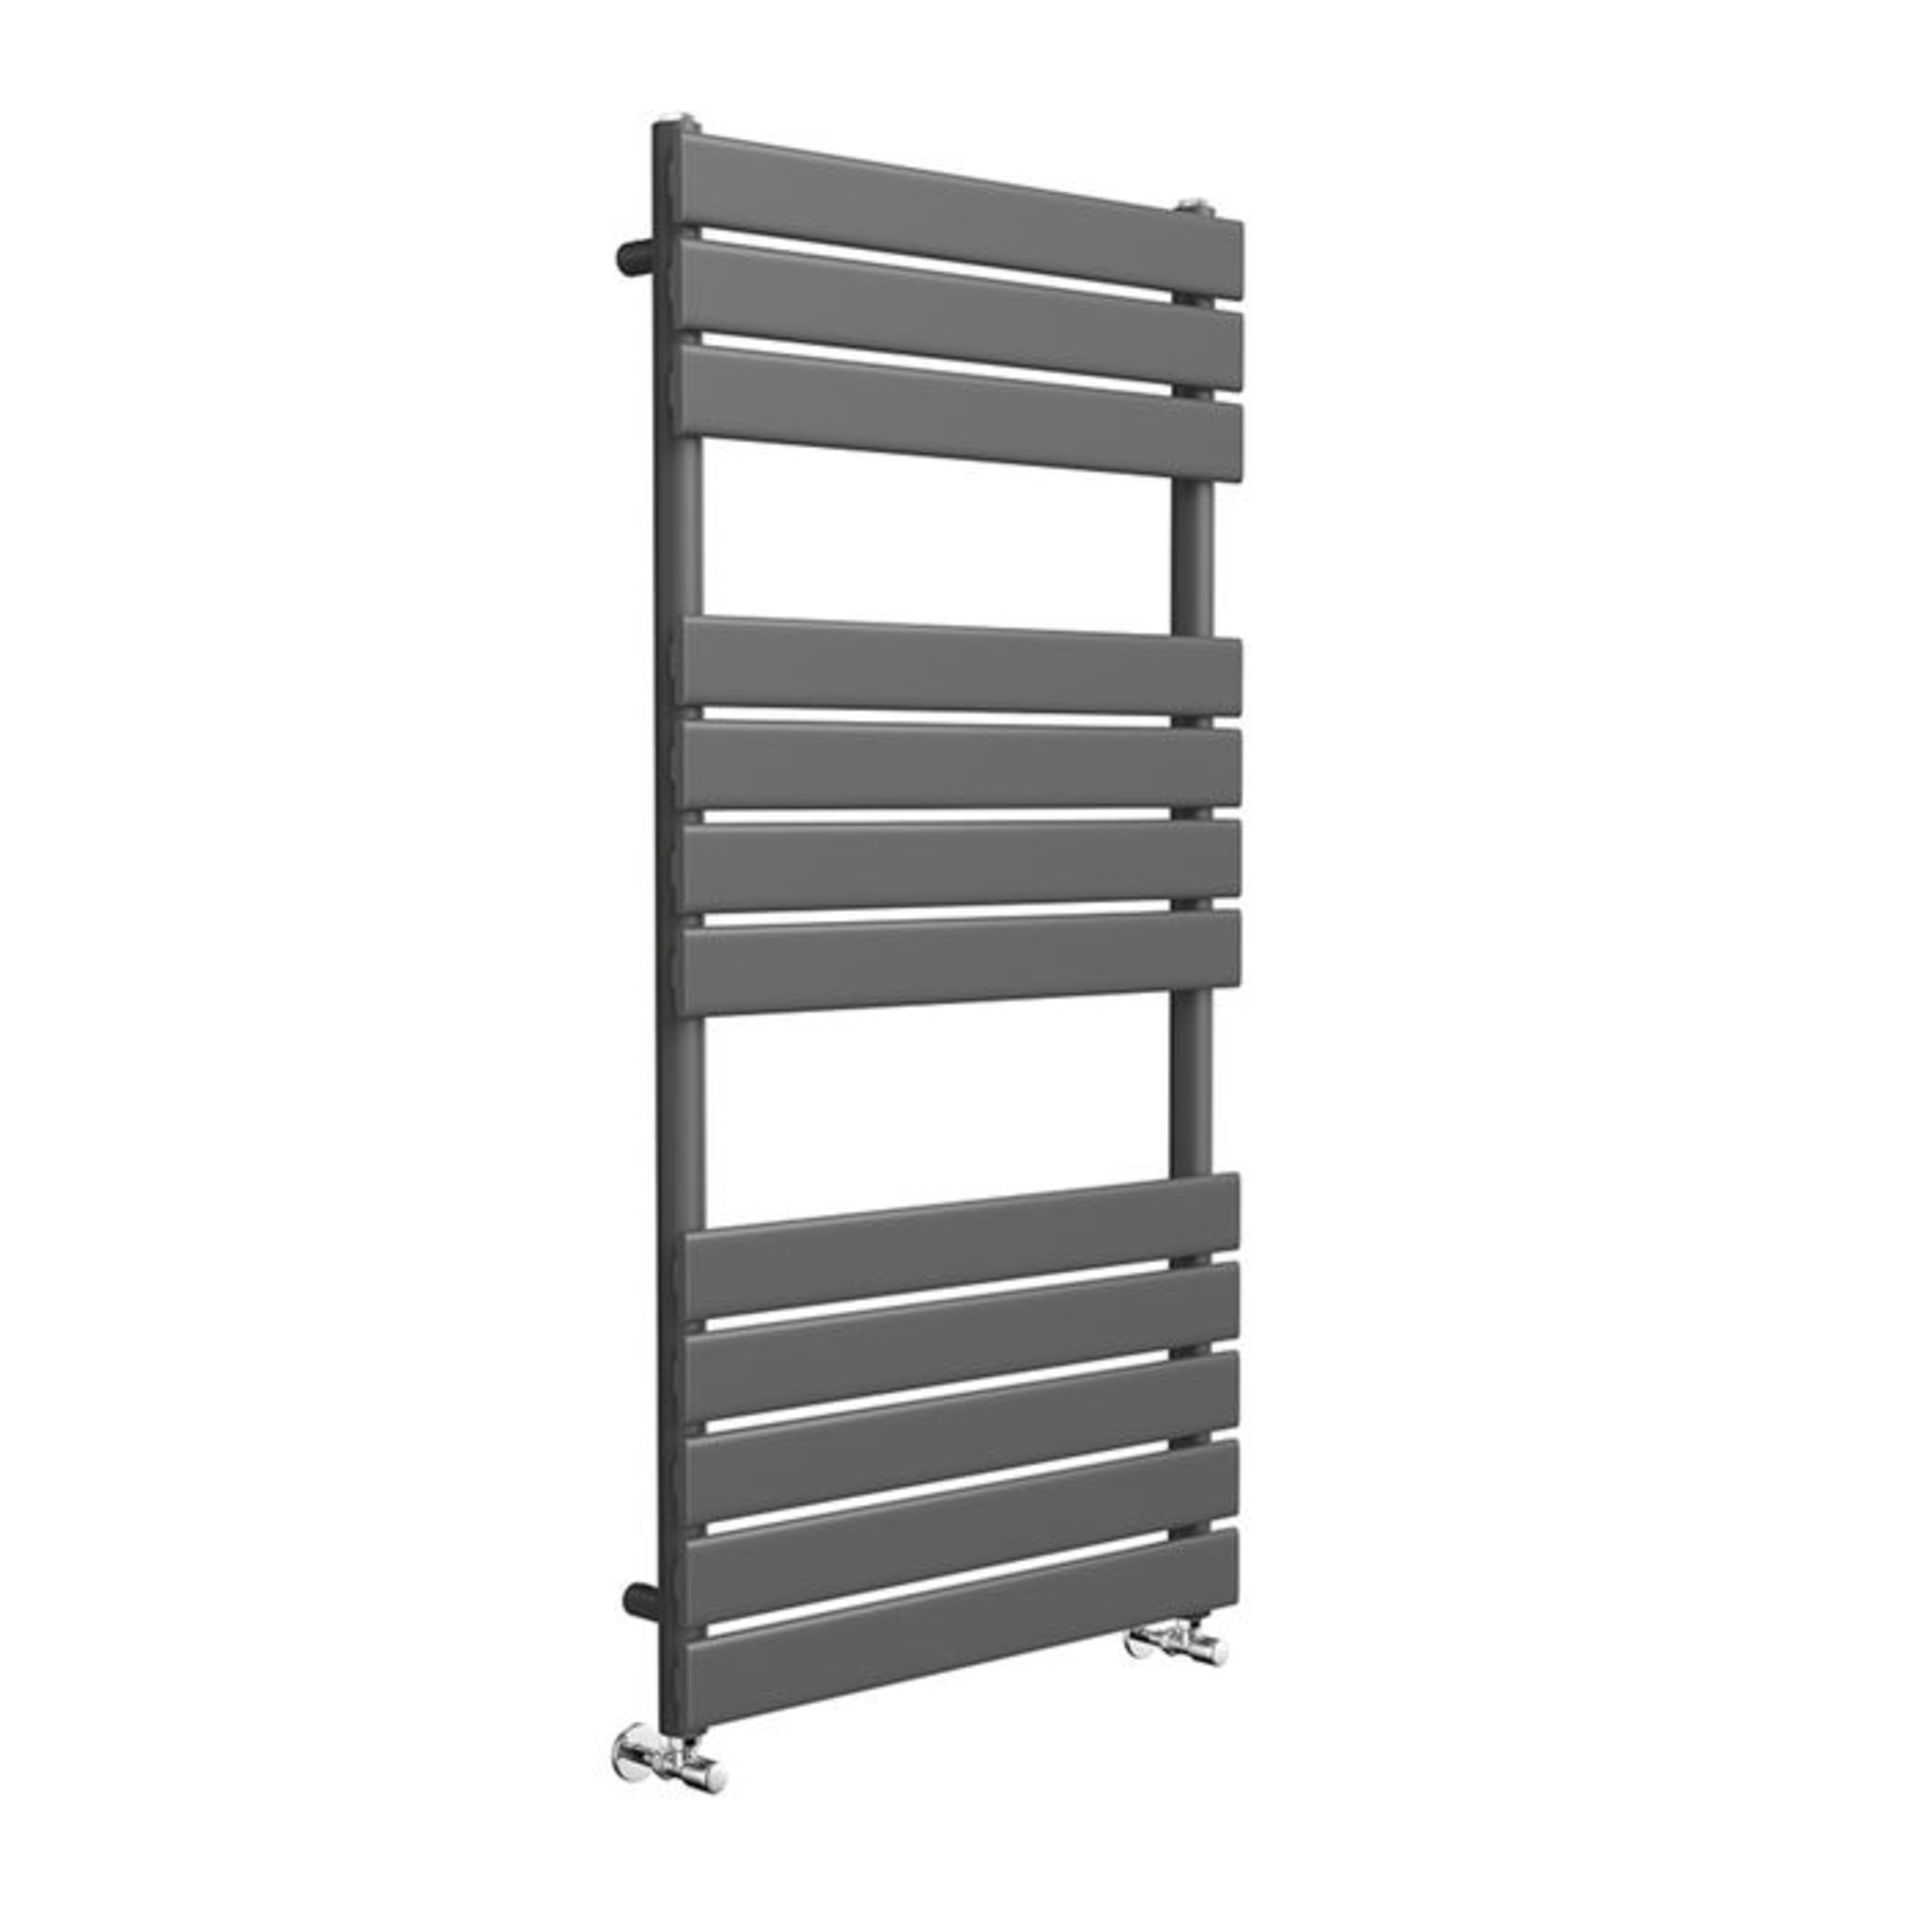 (AL131) 1200x600mm Anthracite Flat Panel Ladder Towel Radiator. Made with low carbon steel, finished - Image 3 of 3